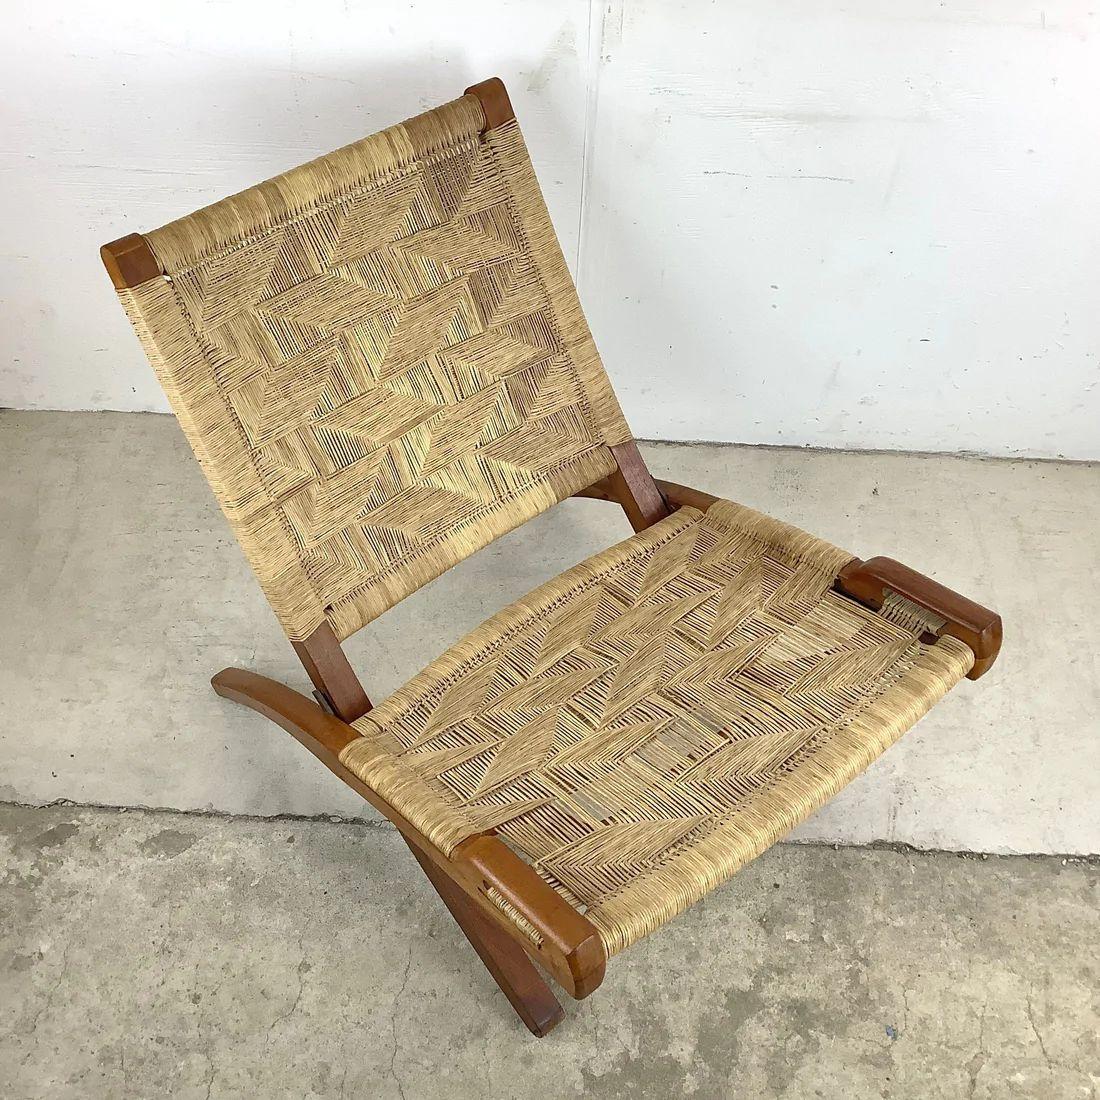 The unique Mid-Century Modern design of this vintage folding rope chair combines quality construction with comfortable proportions to make for a sturdy slipper chair perfect for regular or occasional use. Scandinavian Modern style similar to the